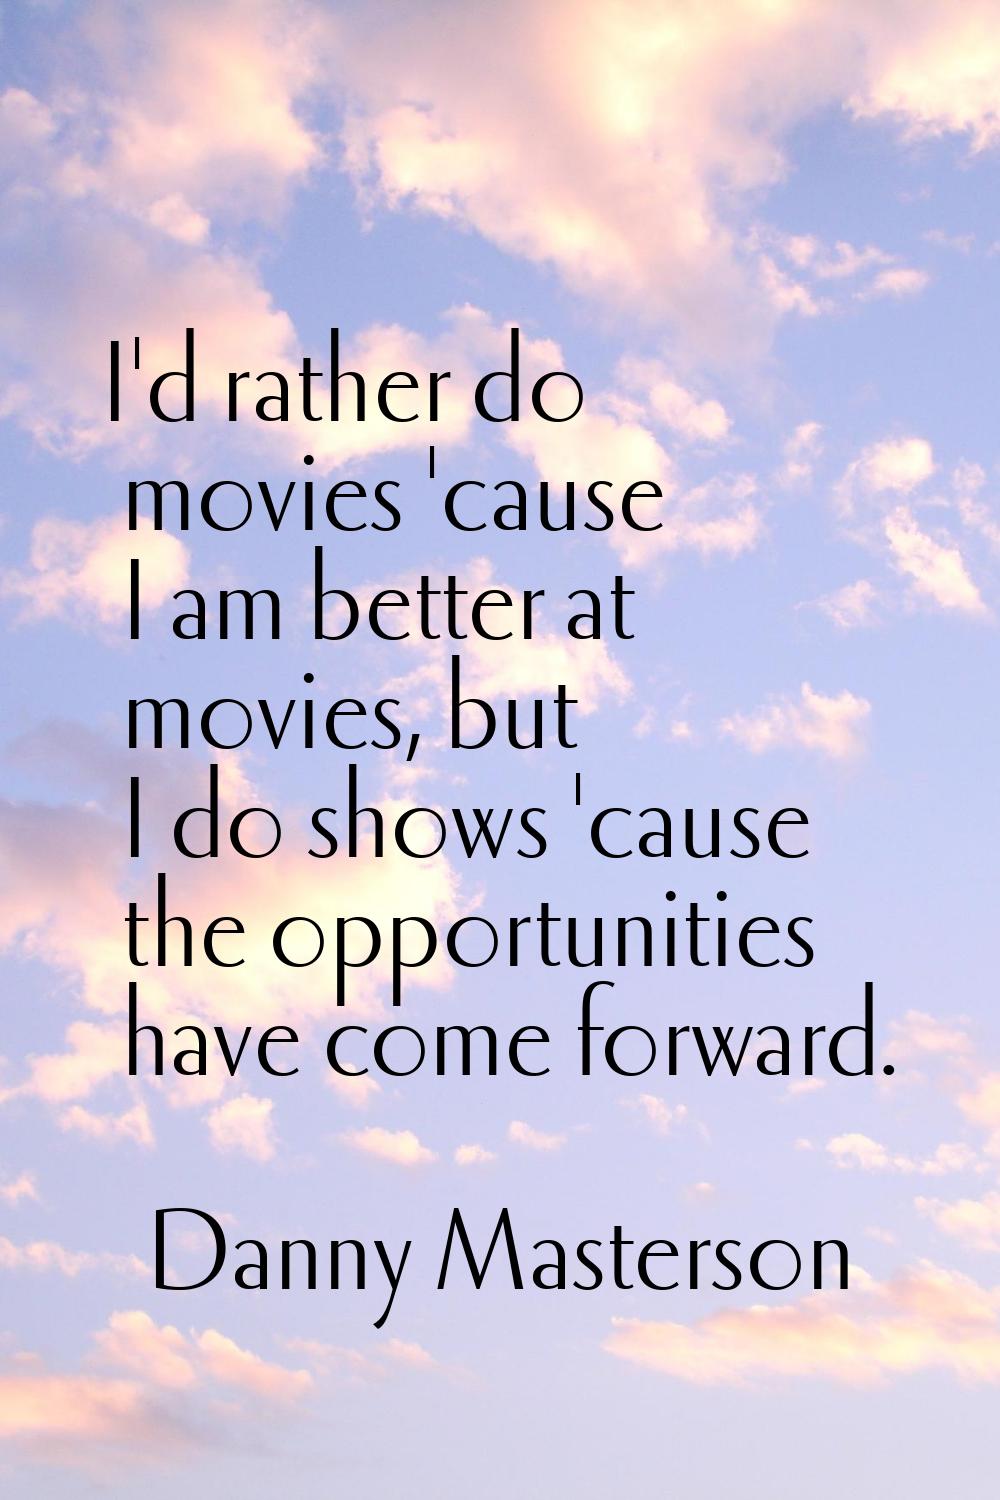 I'd rather do movies 'cause I am better at movies, but I do shows 'cause the opportunities have com